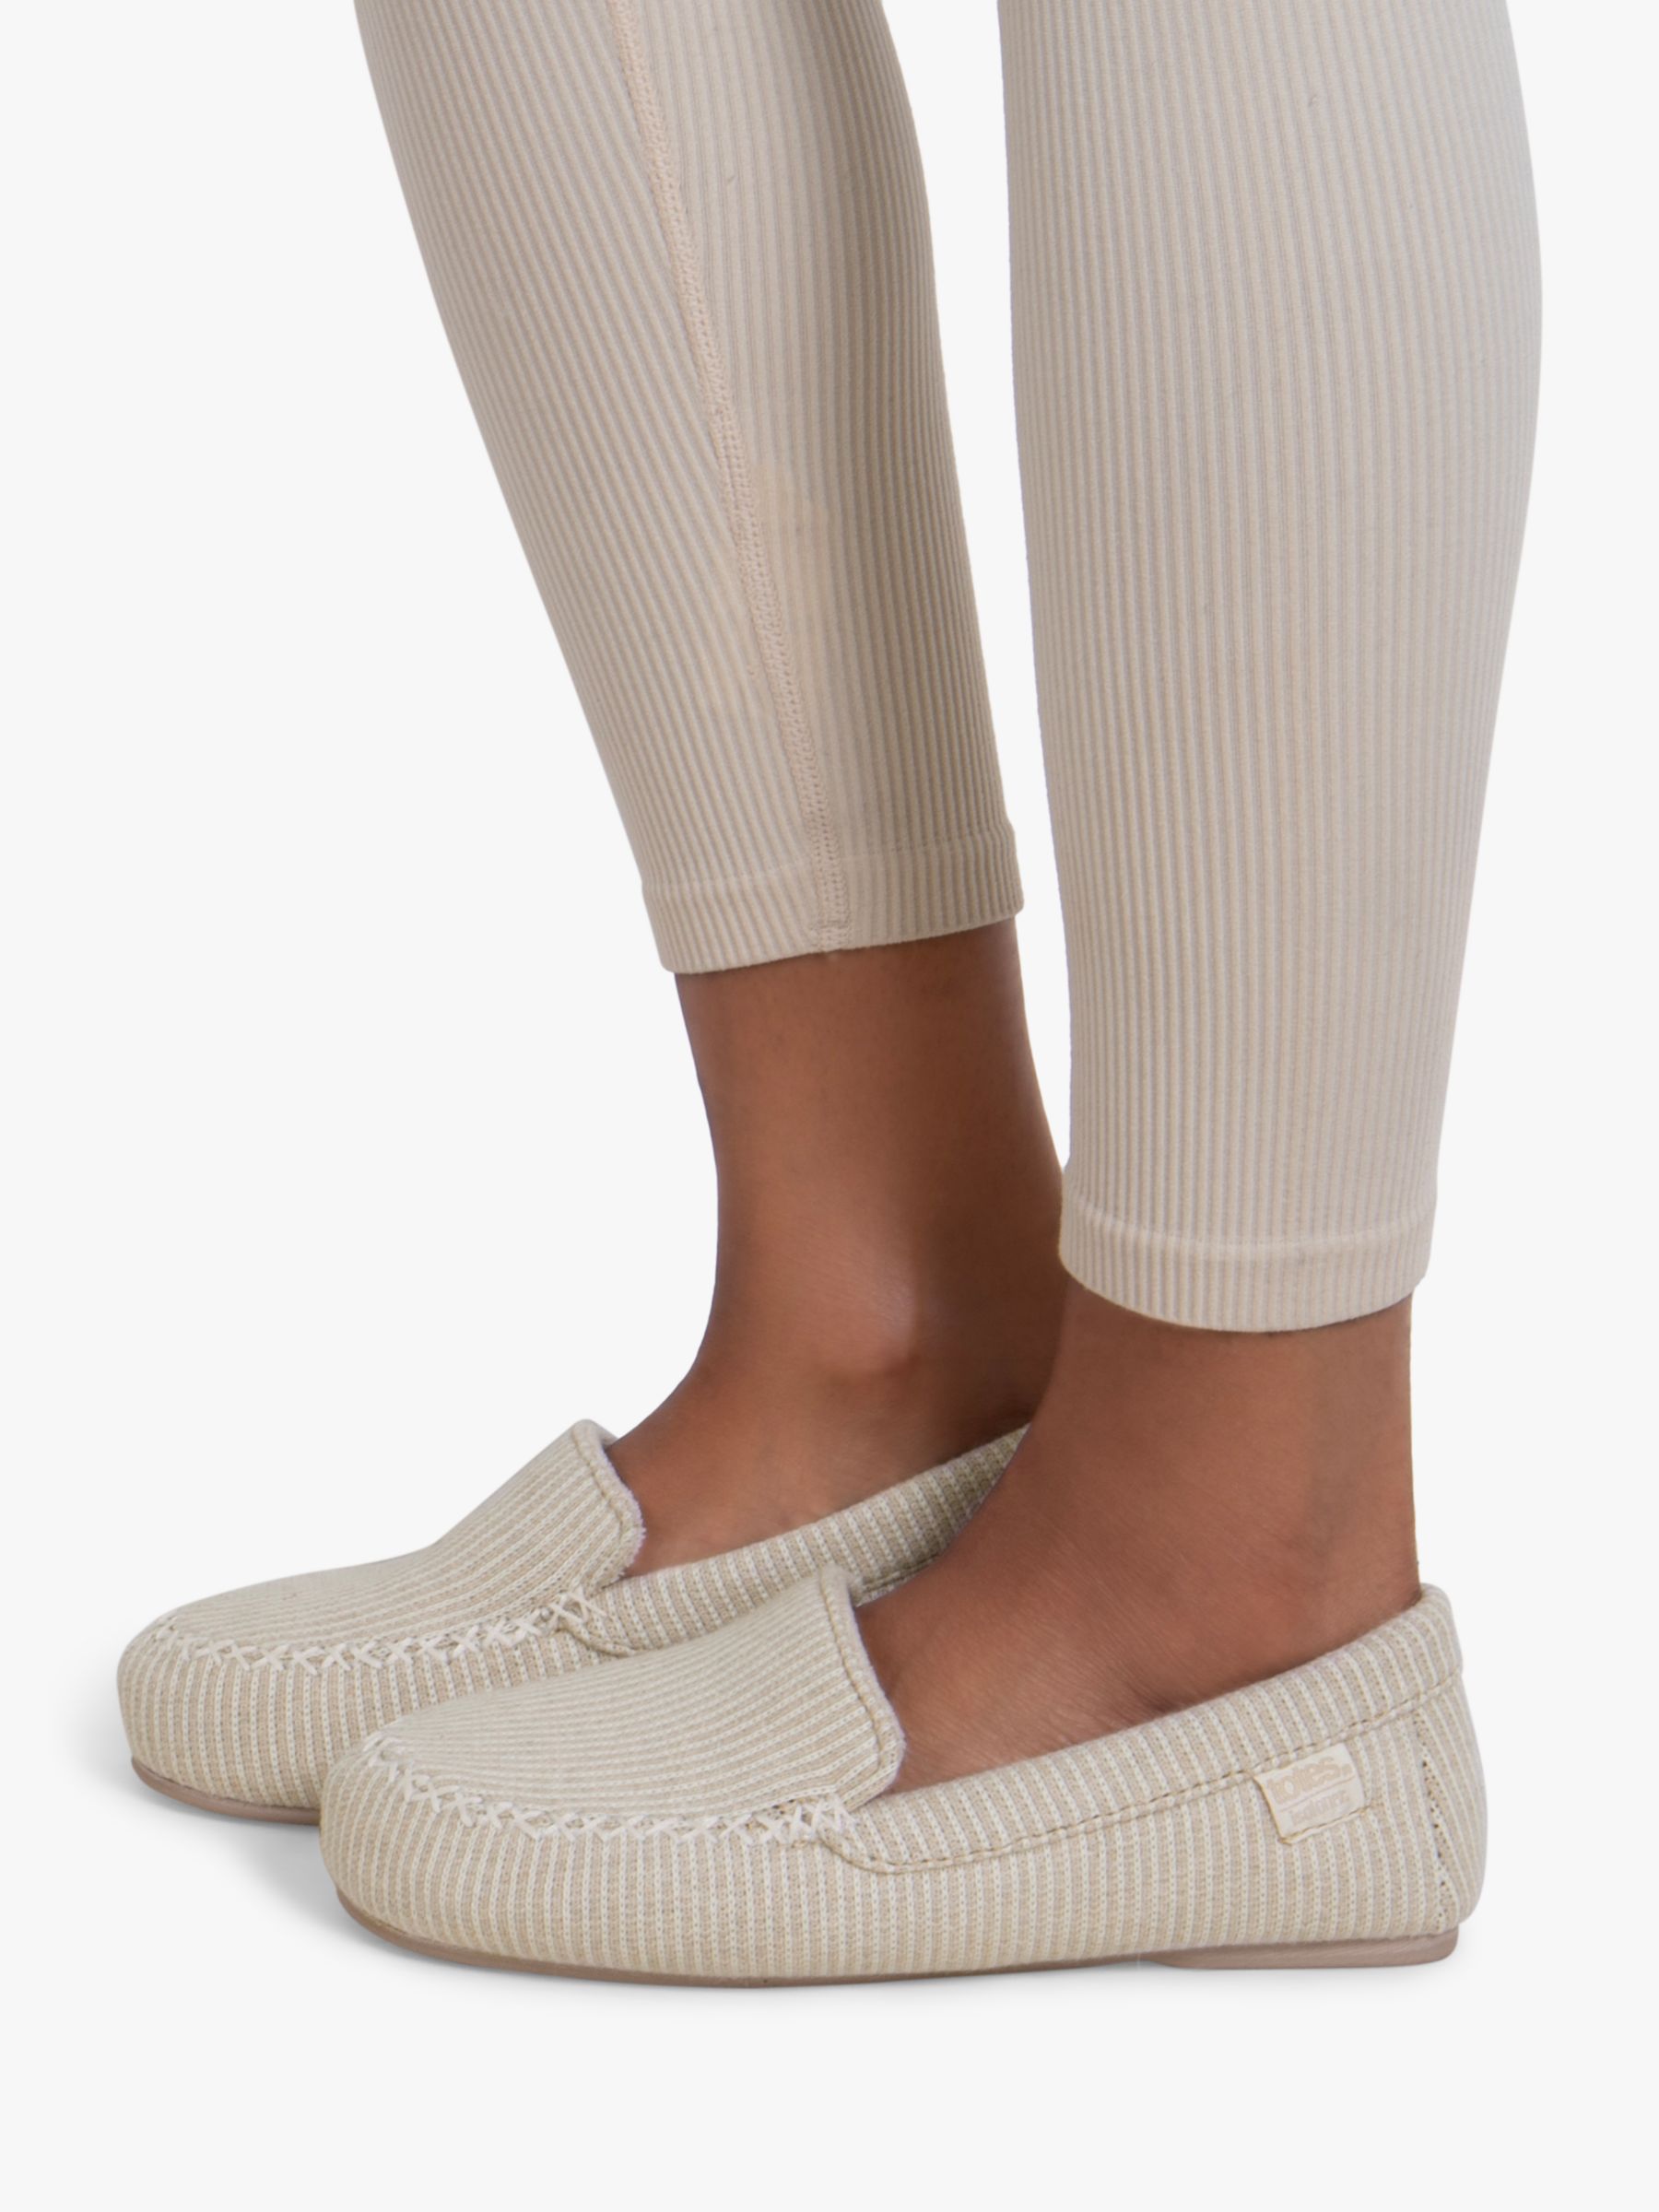 Buy totes Textured Moccasin Slippers, Beige Online at johnlewis.com